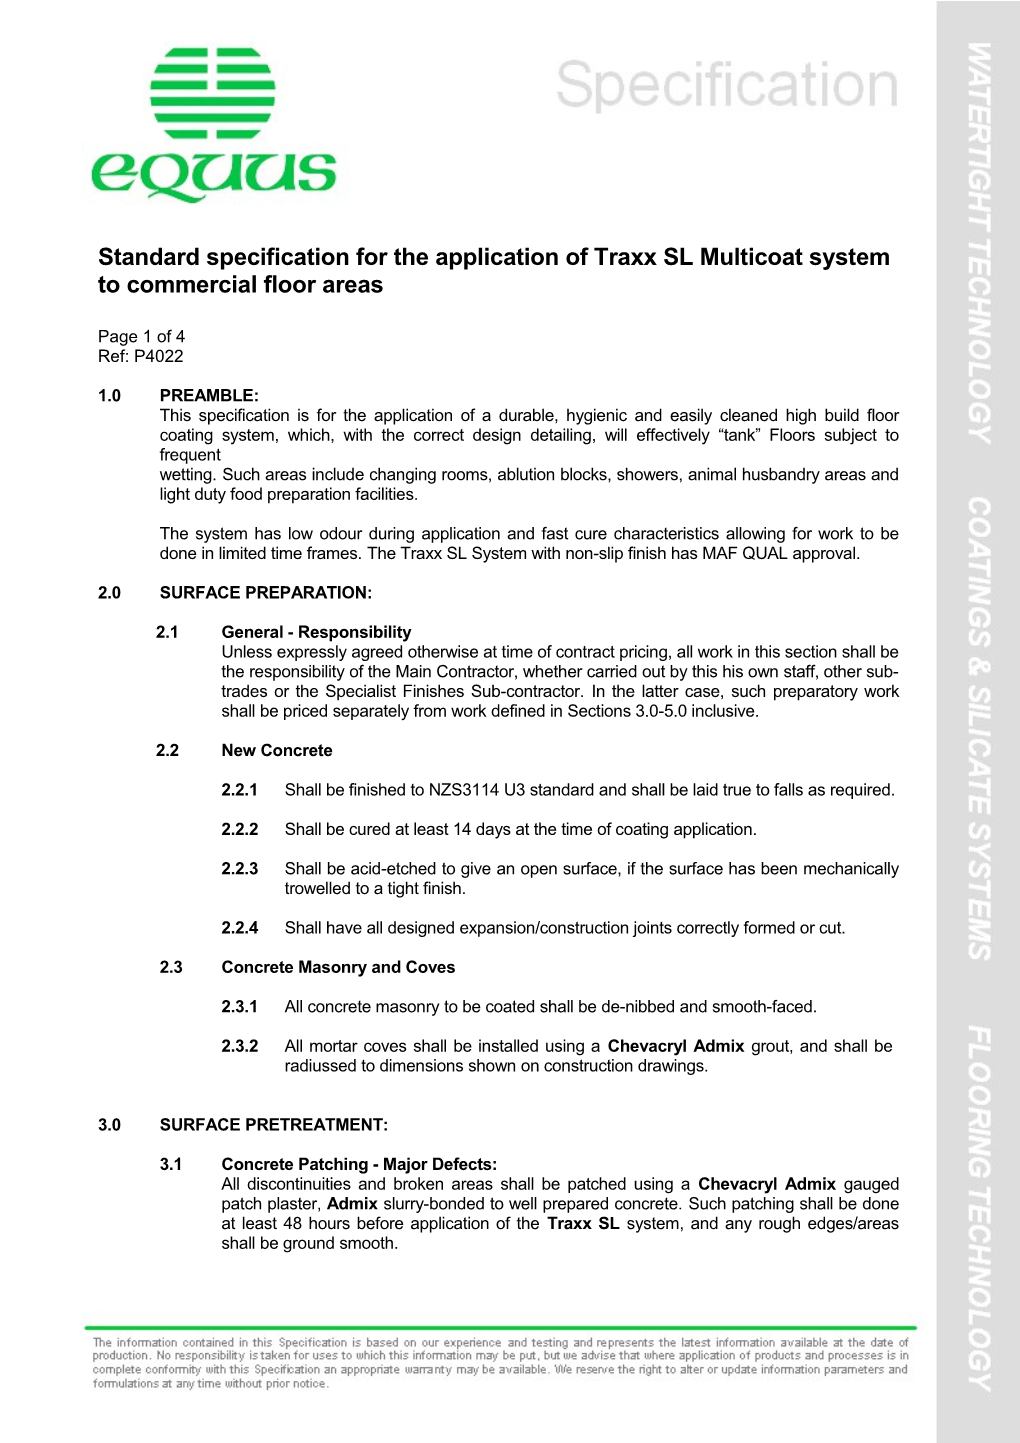 Standard Specification for the Application of Traxx SL Multicoat System to Commercial